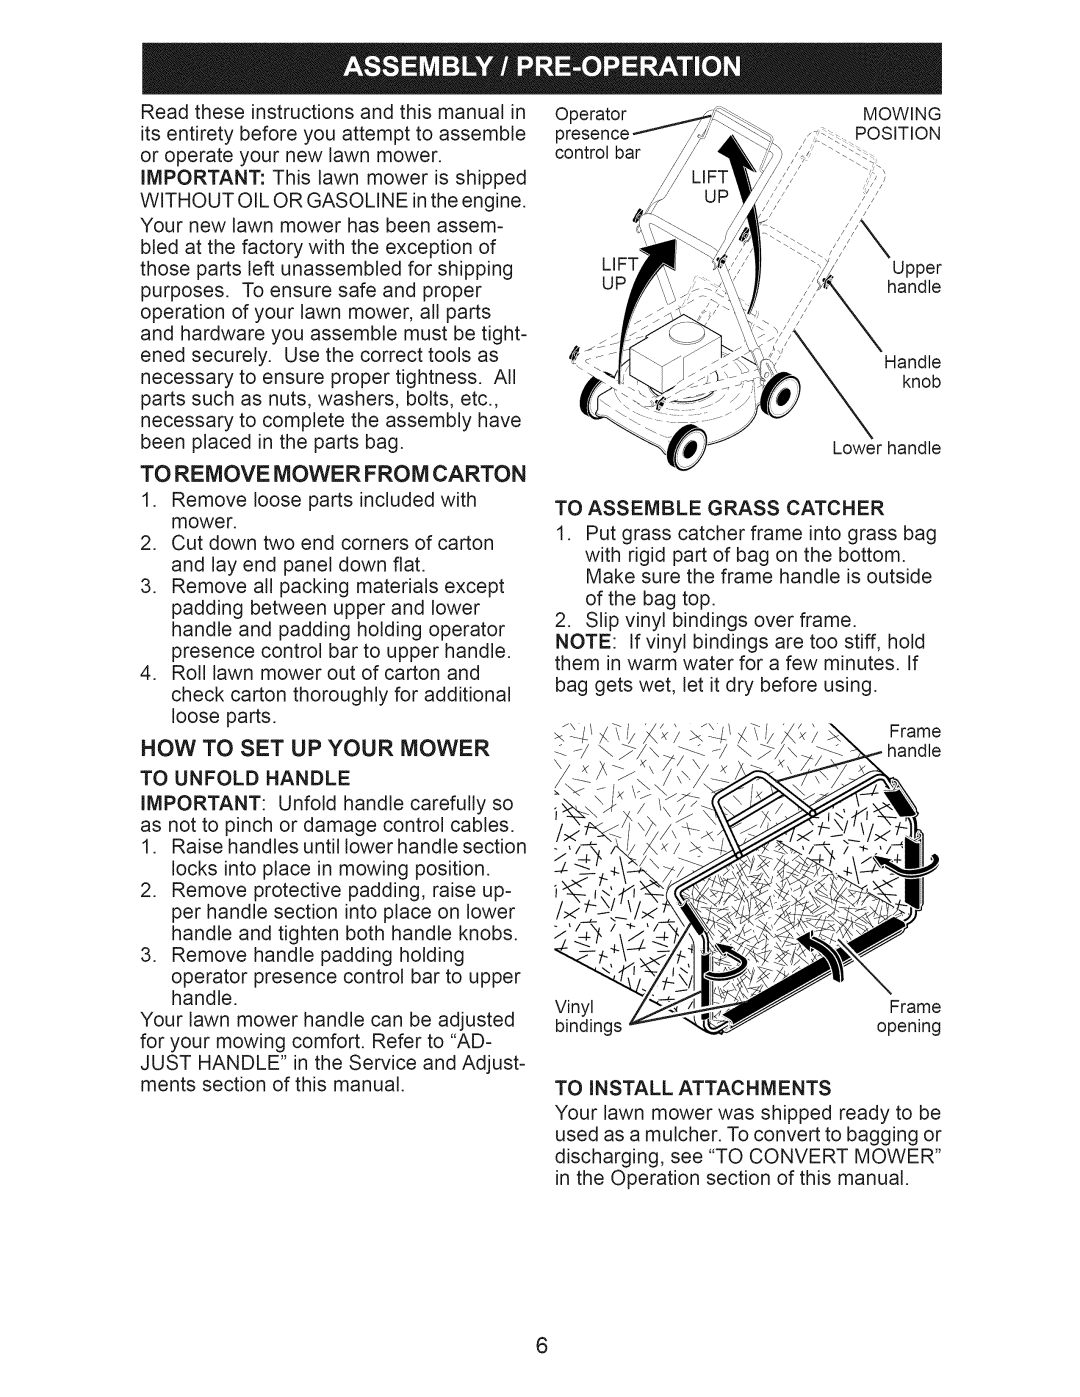 Craftsman 917.389011 manual Now To Set Up Your Mower, To Remove Mower From Carton 